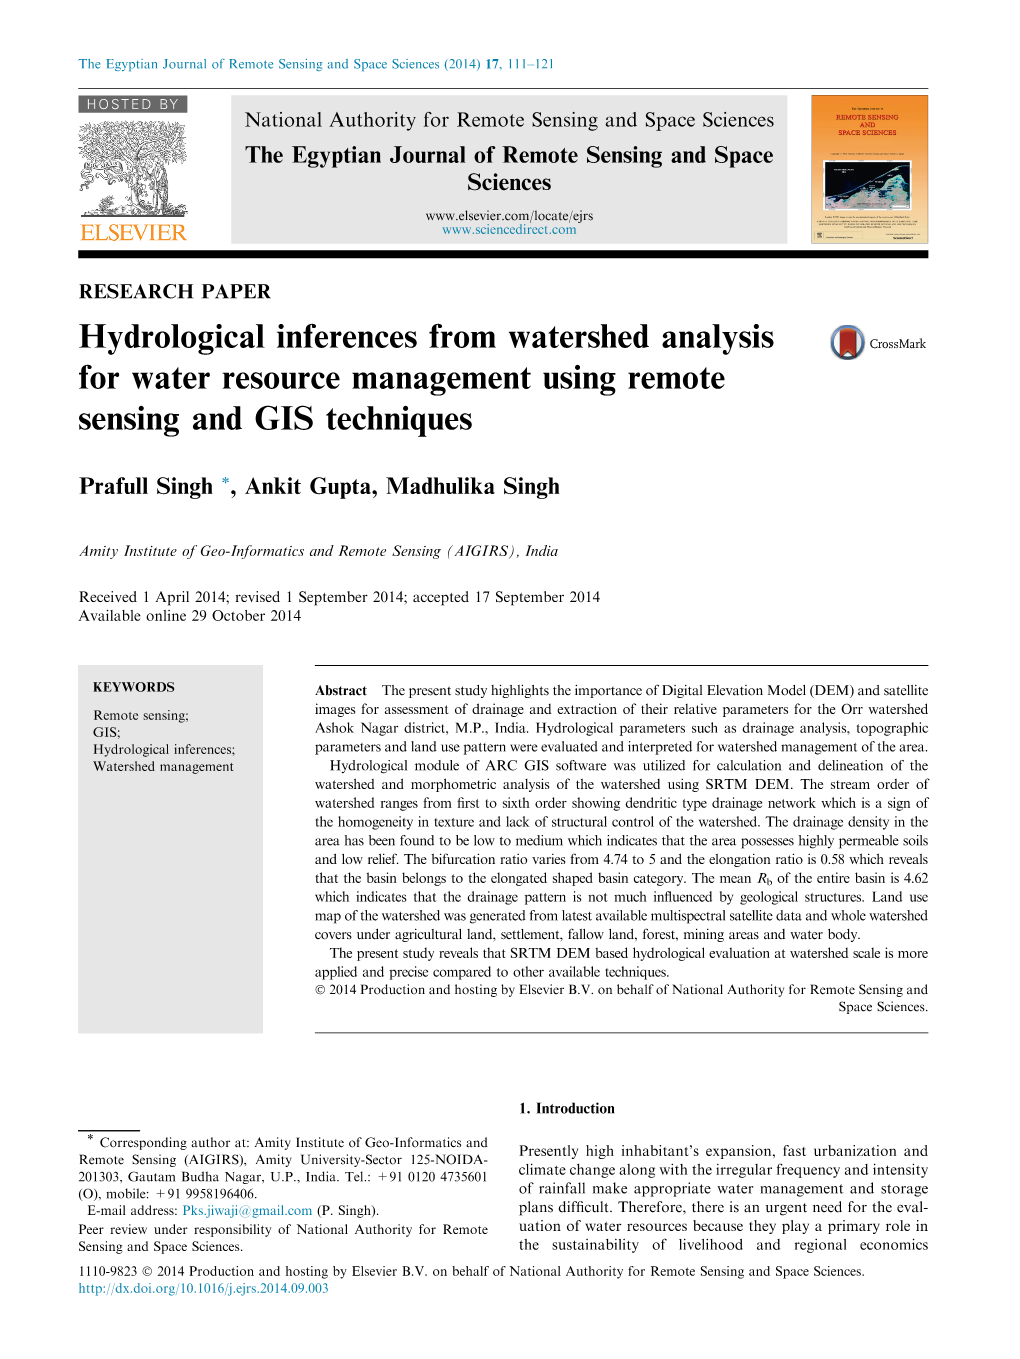 Hydrological Inferences from Watershed Analysis for Water Resource Management Using Remote Sensing and GIS Techniques